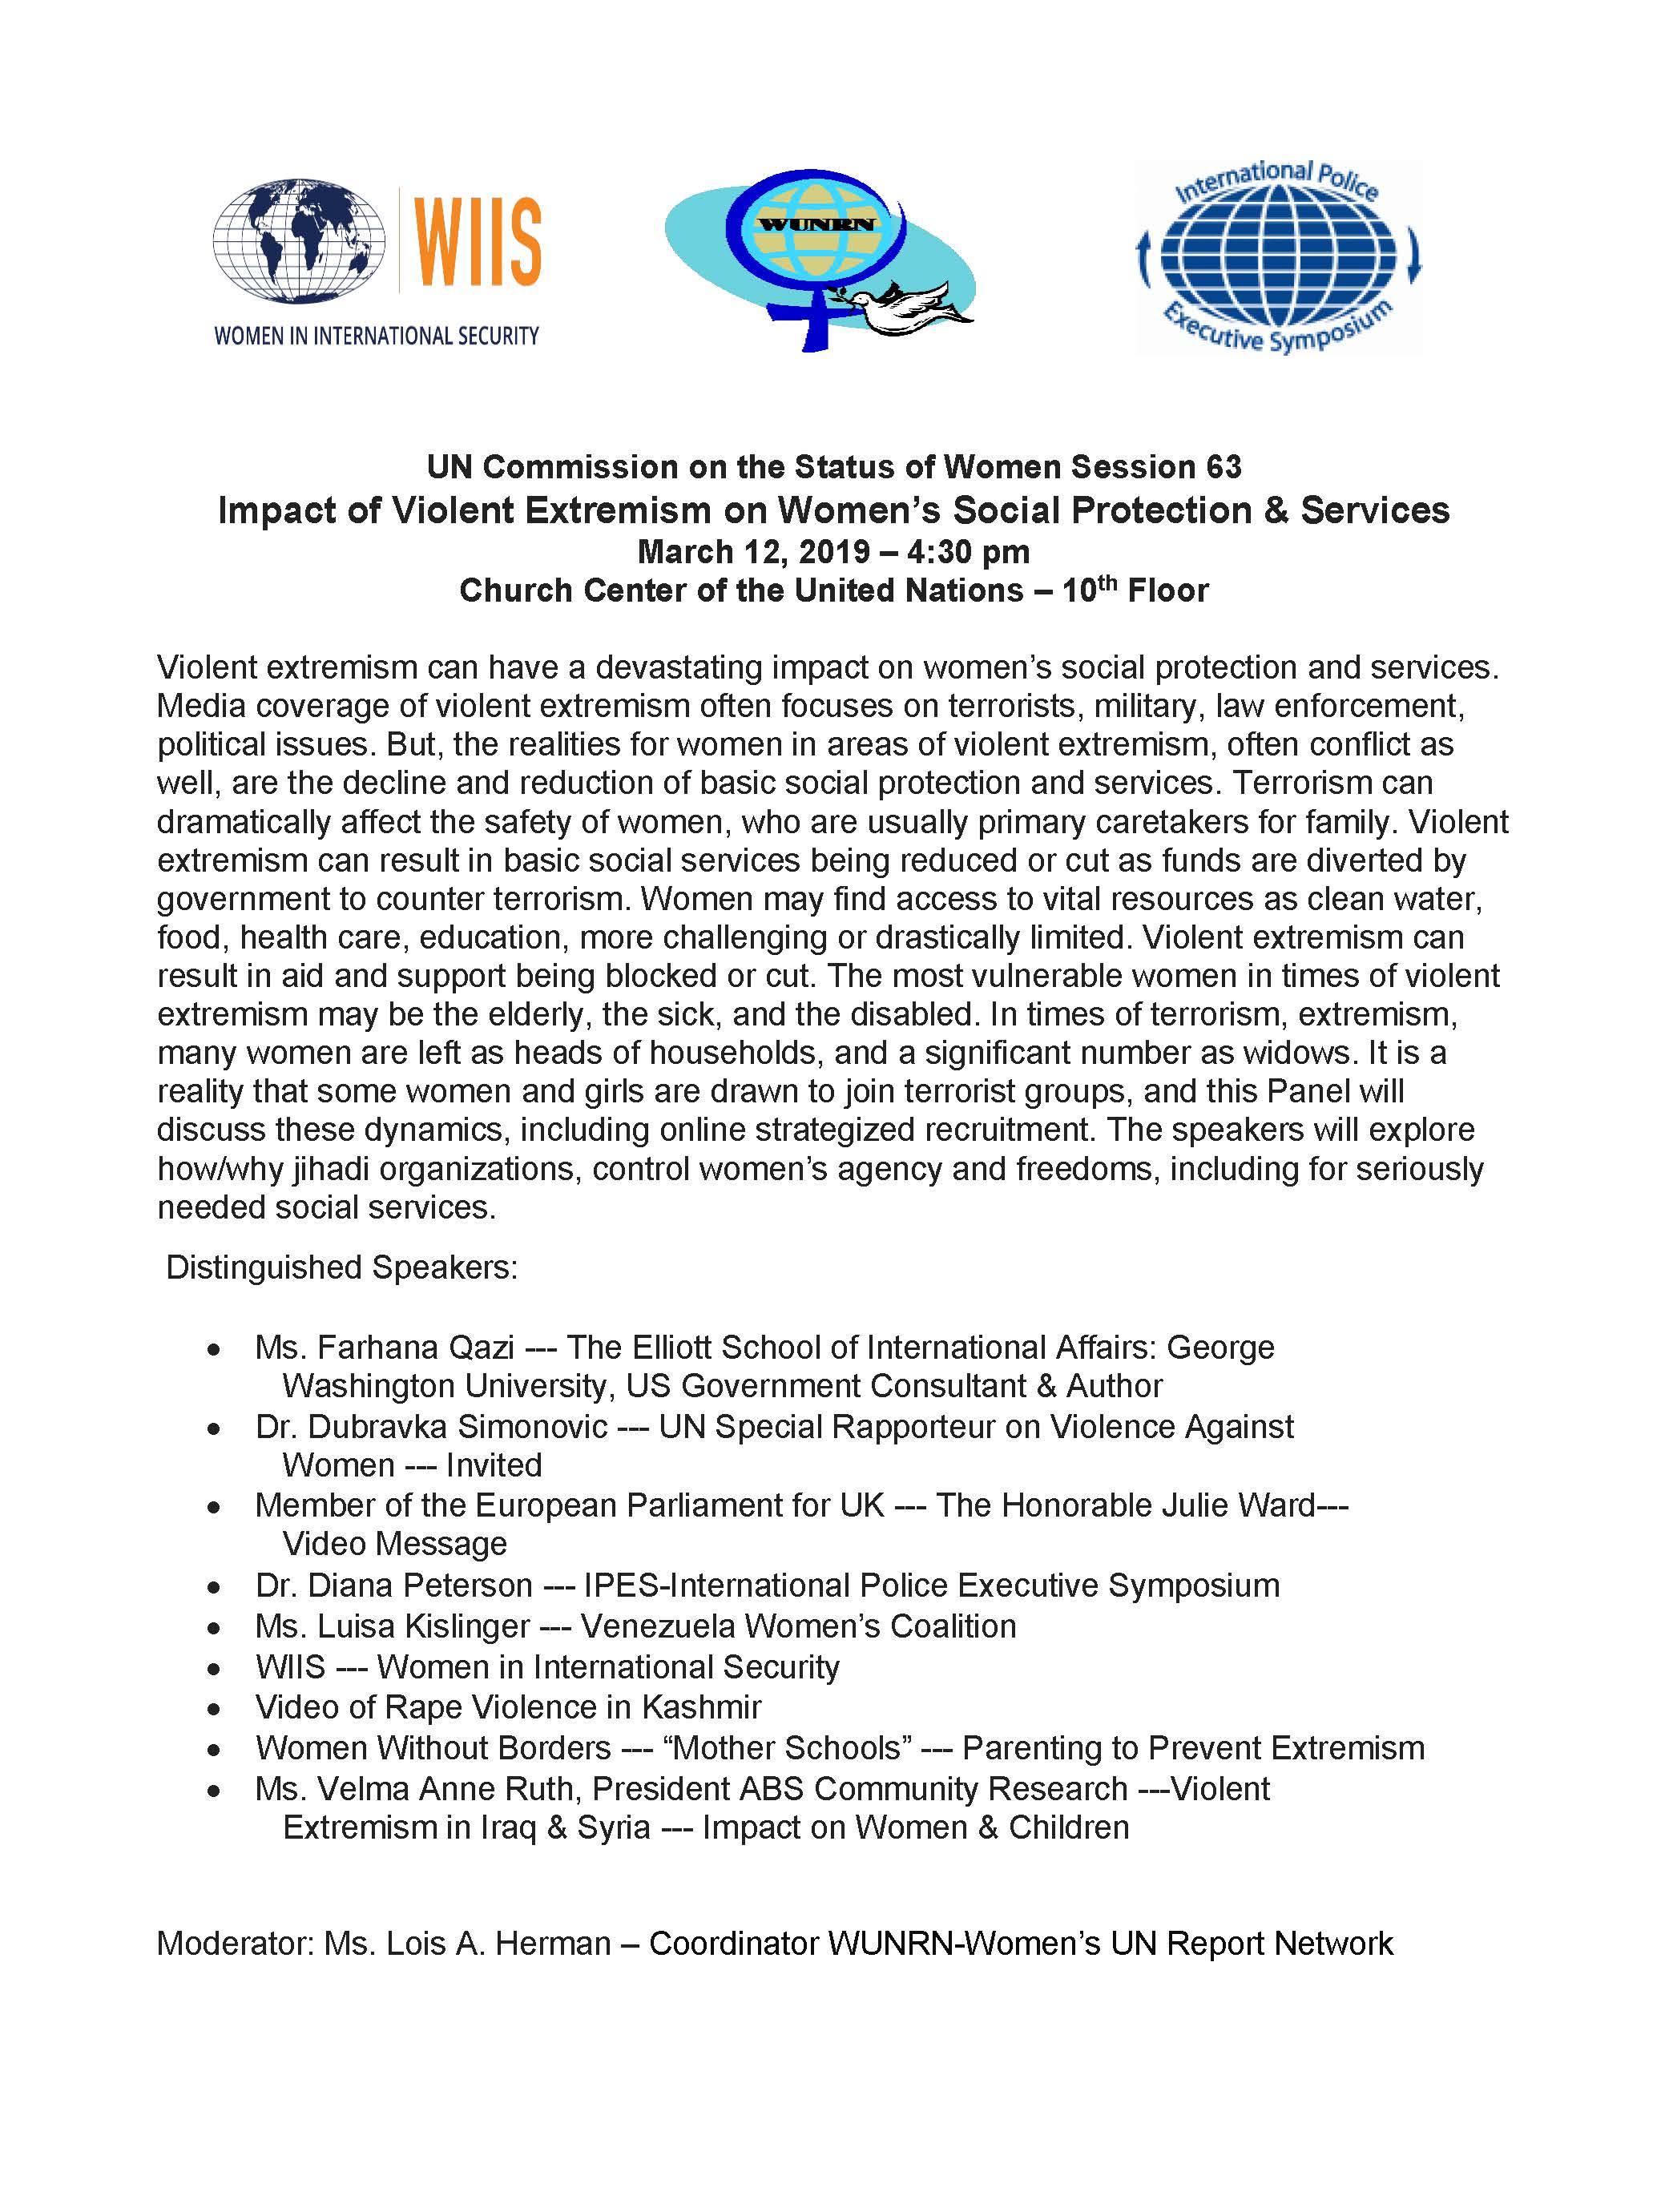 UN Commission on the Status of Women - Session 63 - Impact of Violent Extremism on Women’s Social Protection & Services - March 12, 2019 – 4:30 pm - Church Center of the United Nations – 10th Floor